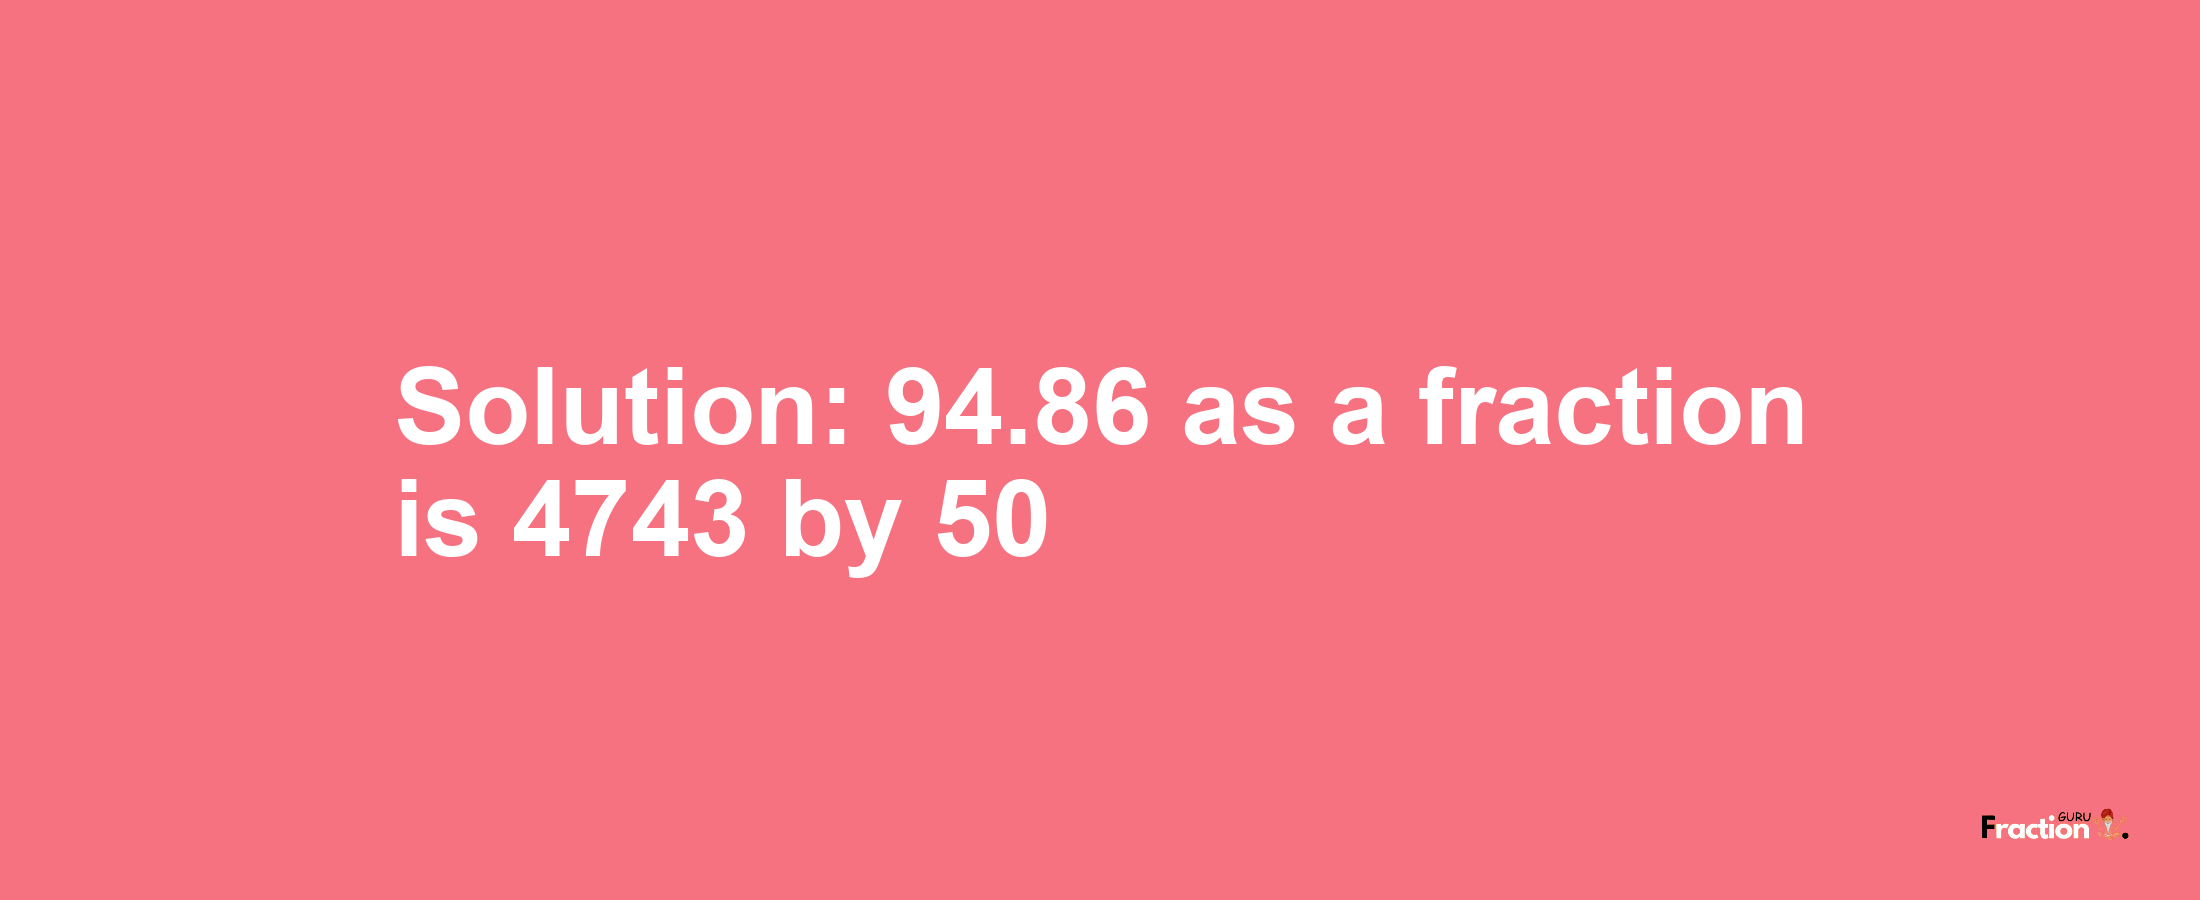 Solution:94.86 as a fraction is 4743/50